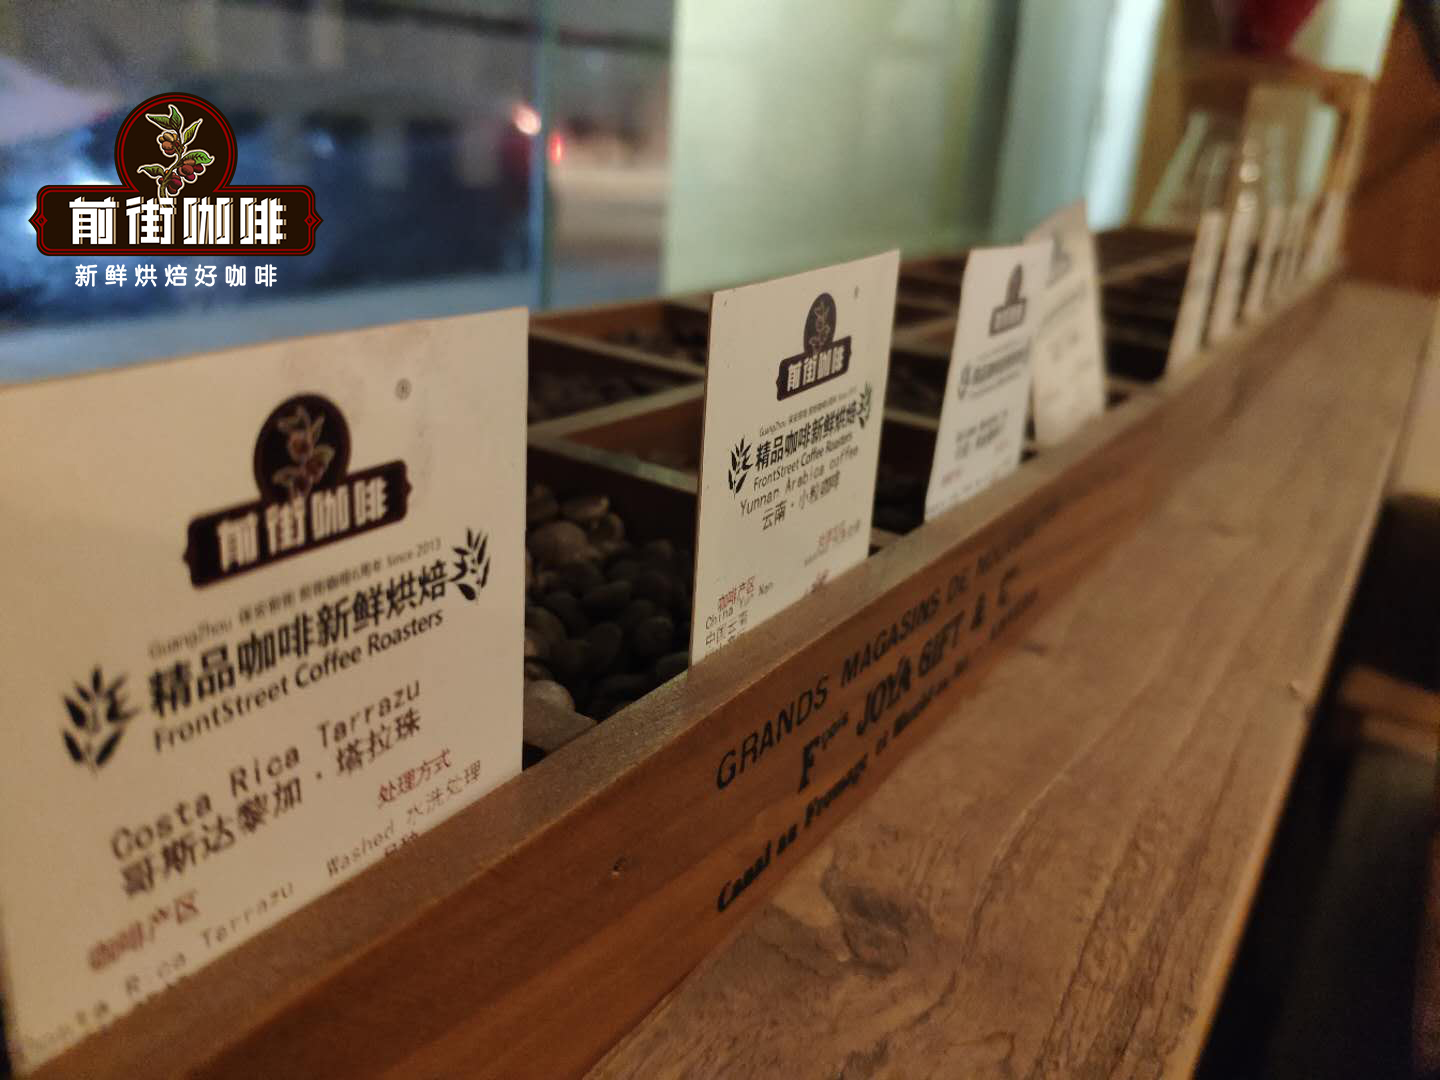 2022 Qianjie boutique coffee bean price list Qianjie coffee freshly roasted cooked beans price list